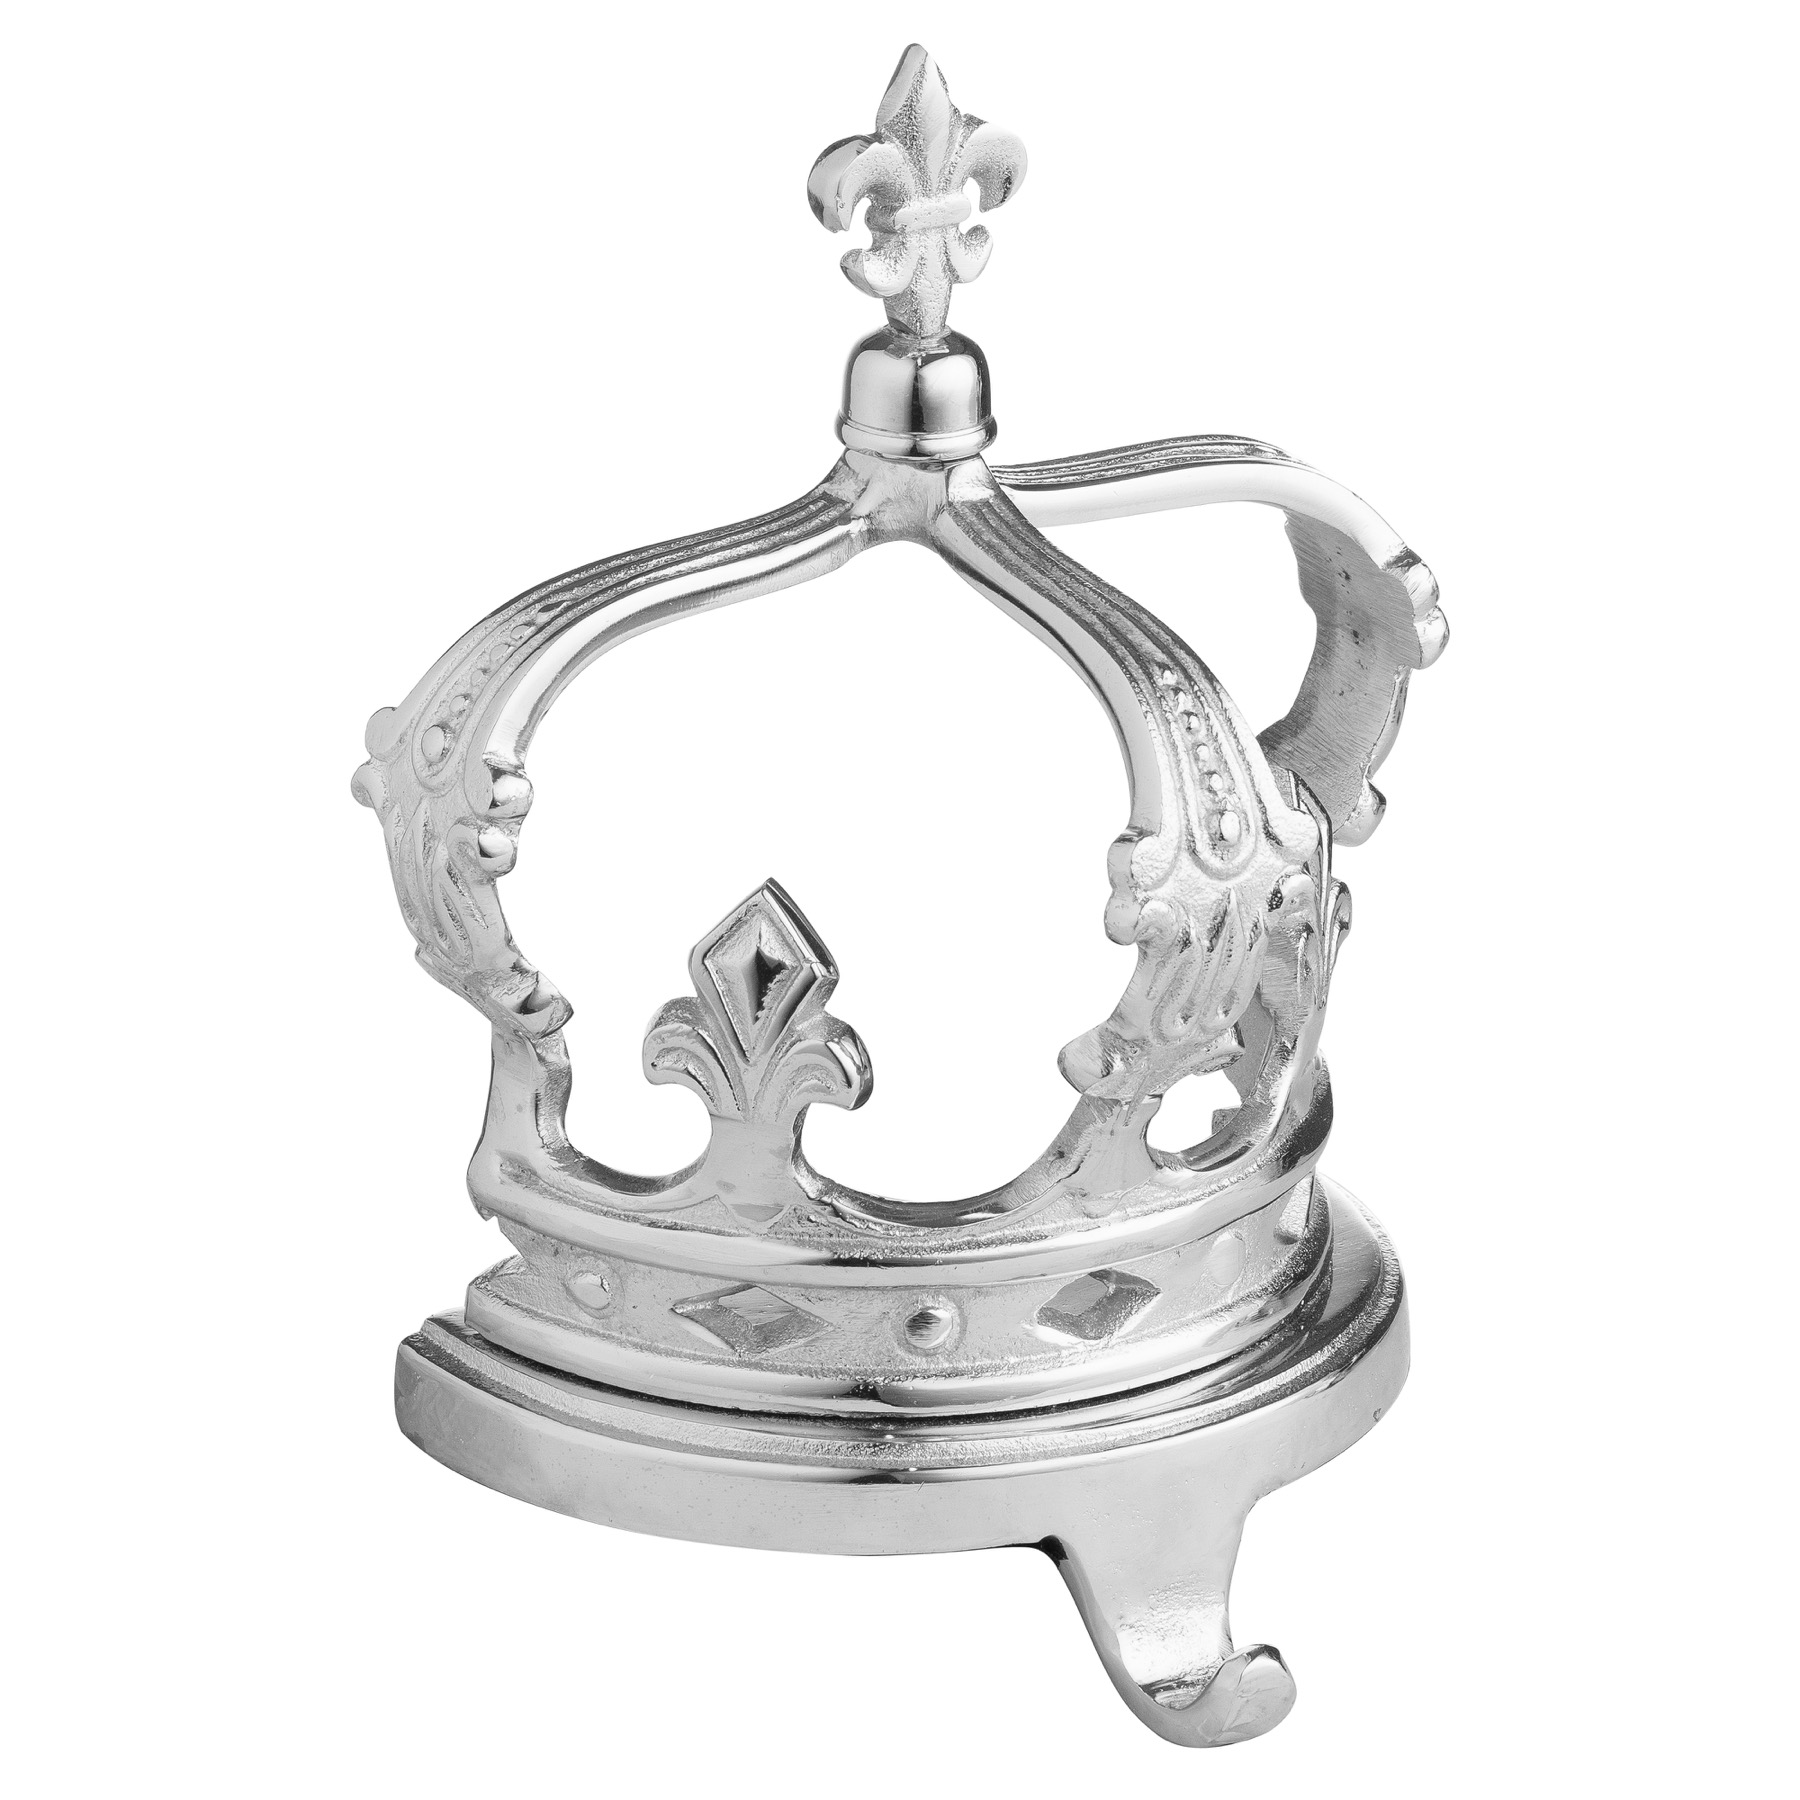 The Queens Crown Nickel Stocking Holder - Image 1